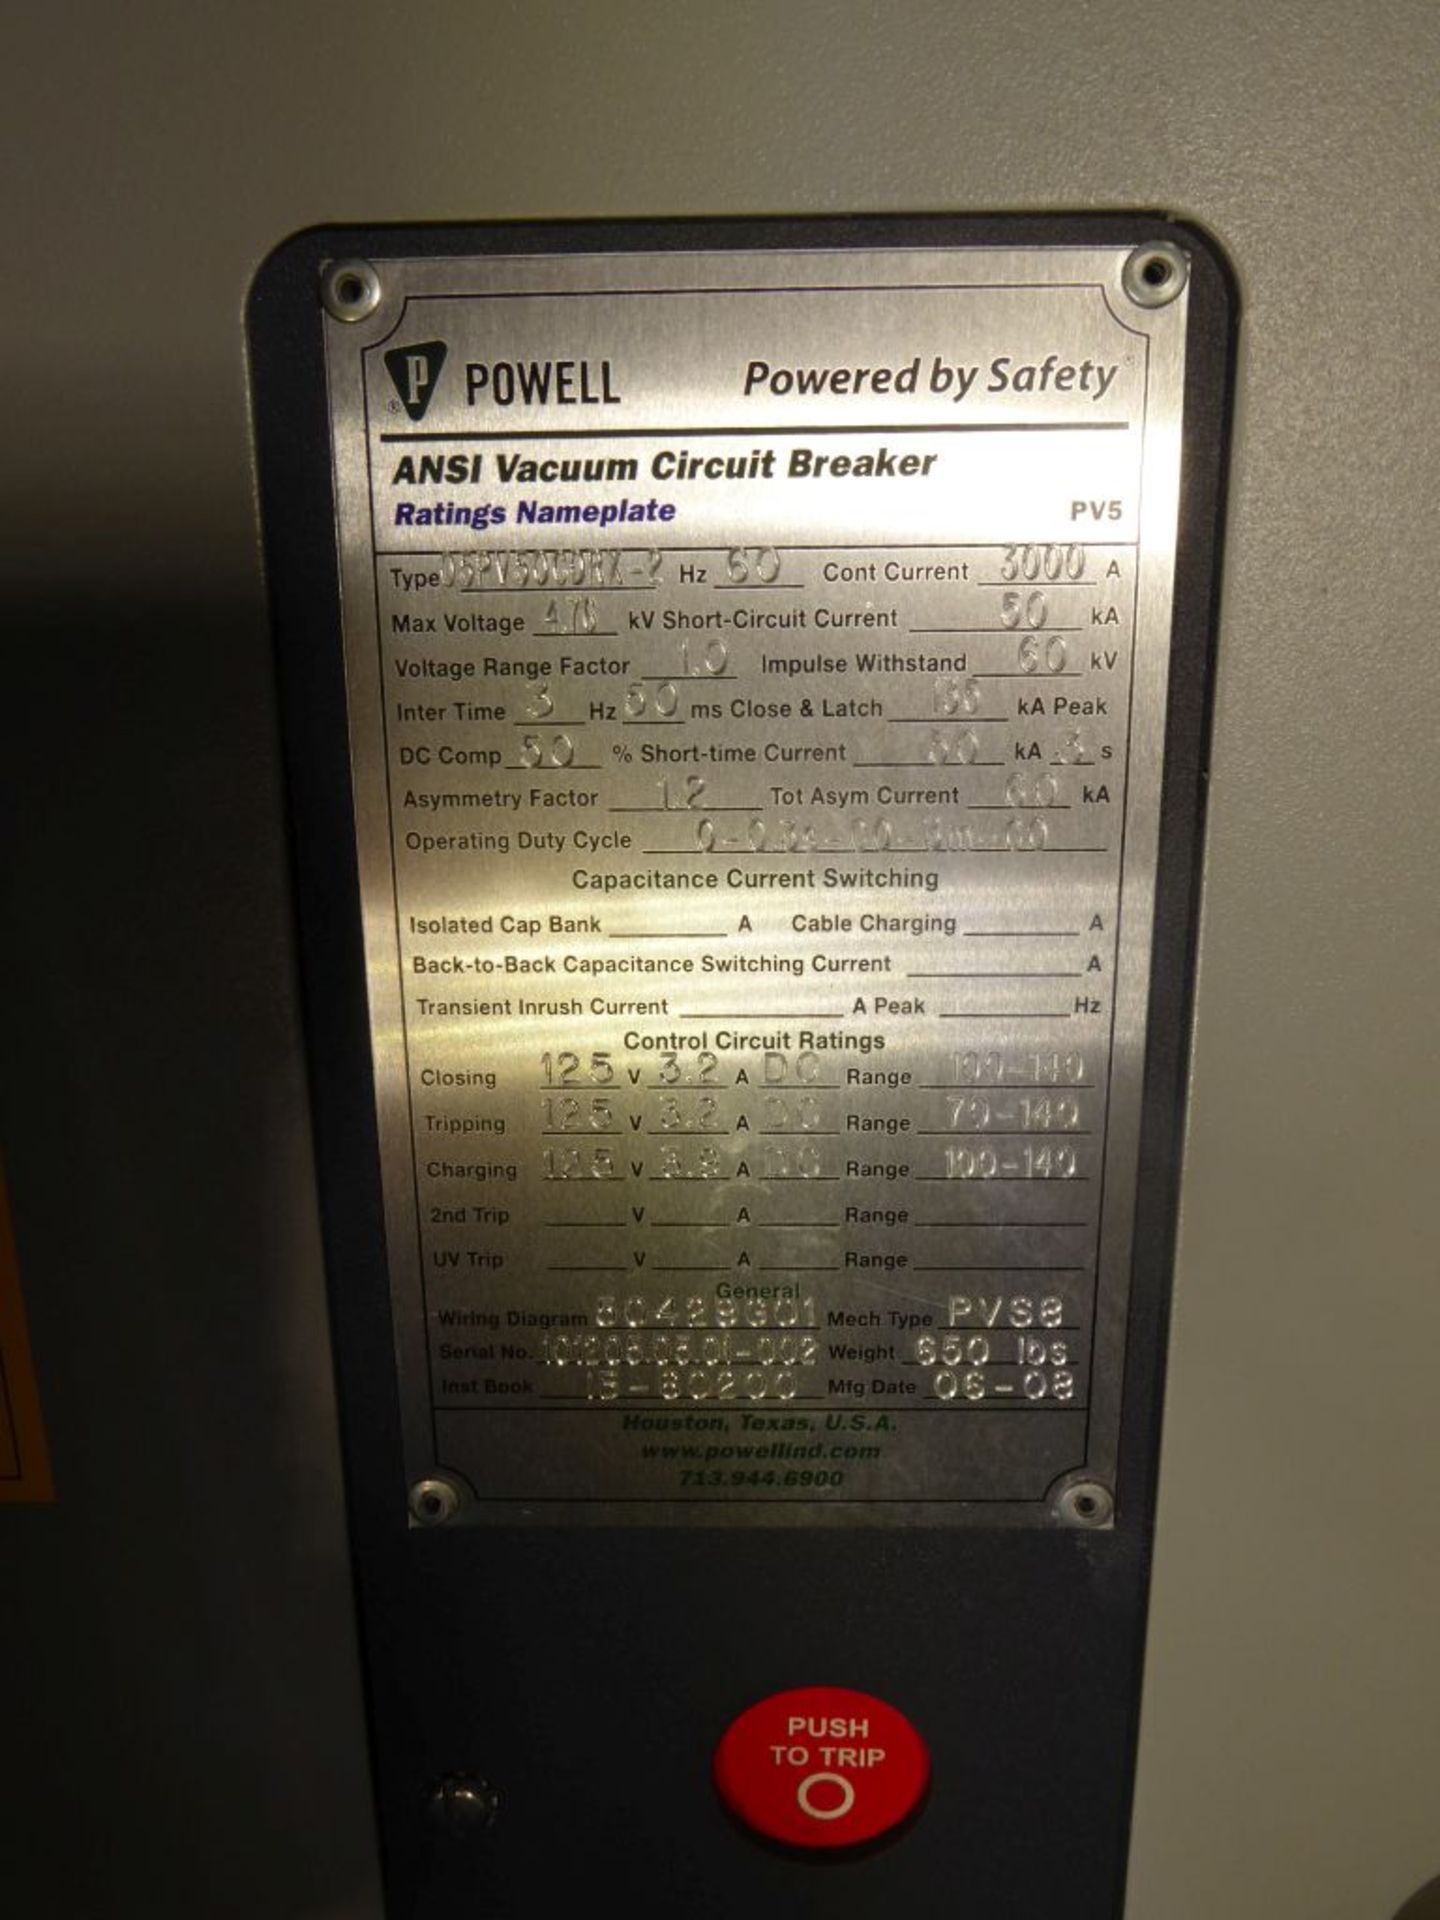 Powell 3000A Arc Resistant MV Metal Clad Switchgear - Image 62 of 68